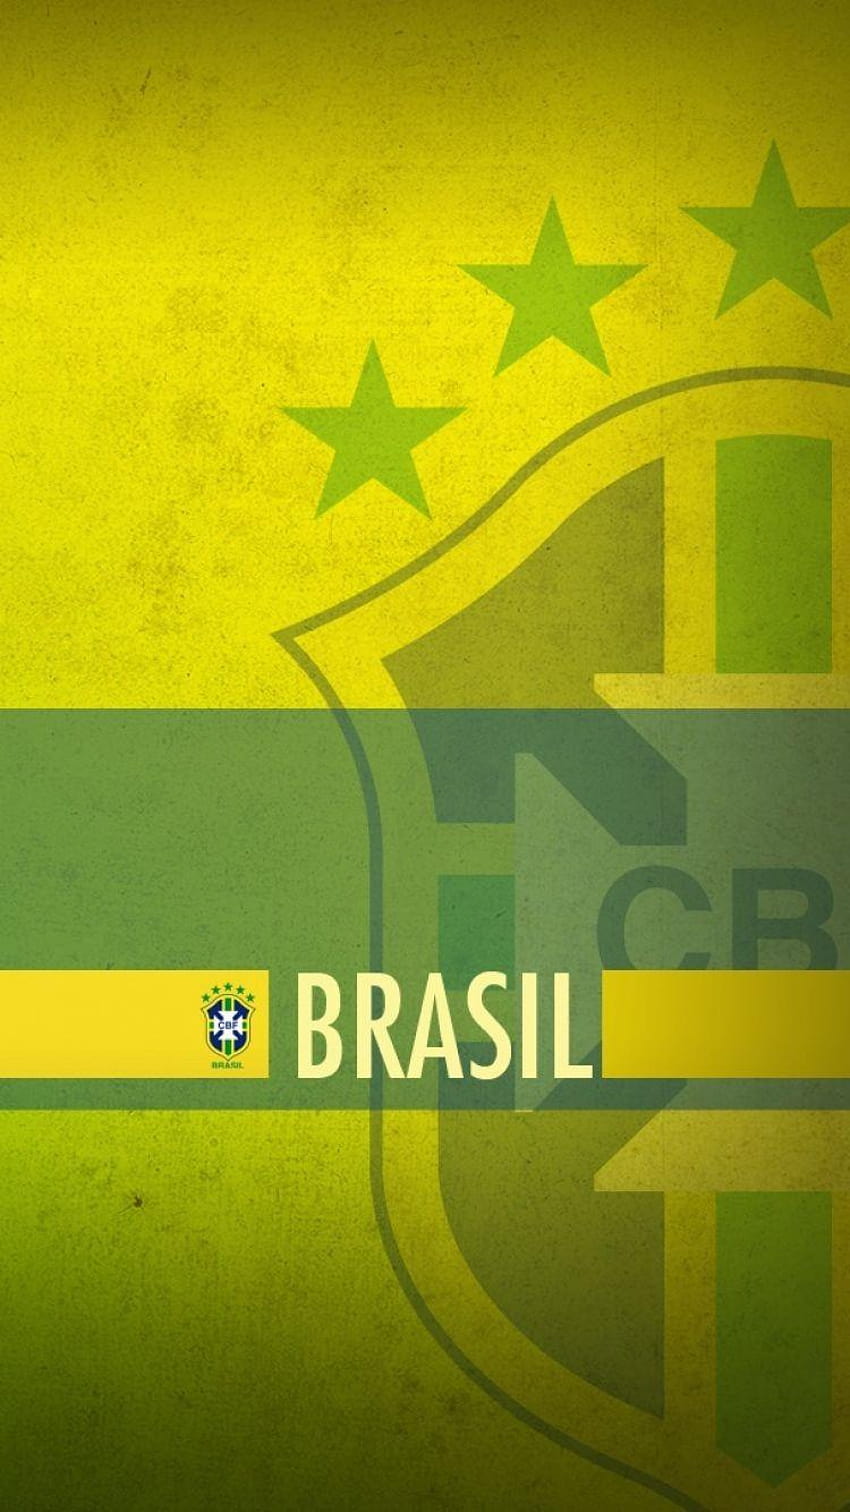 Brazil Football Vector Design Images, Football Fan Logo With Brazil Flag  Inside, Football, World Cup 2022, Brazil PNG Image For Free Download